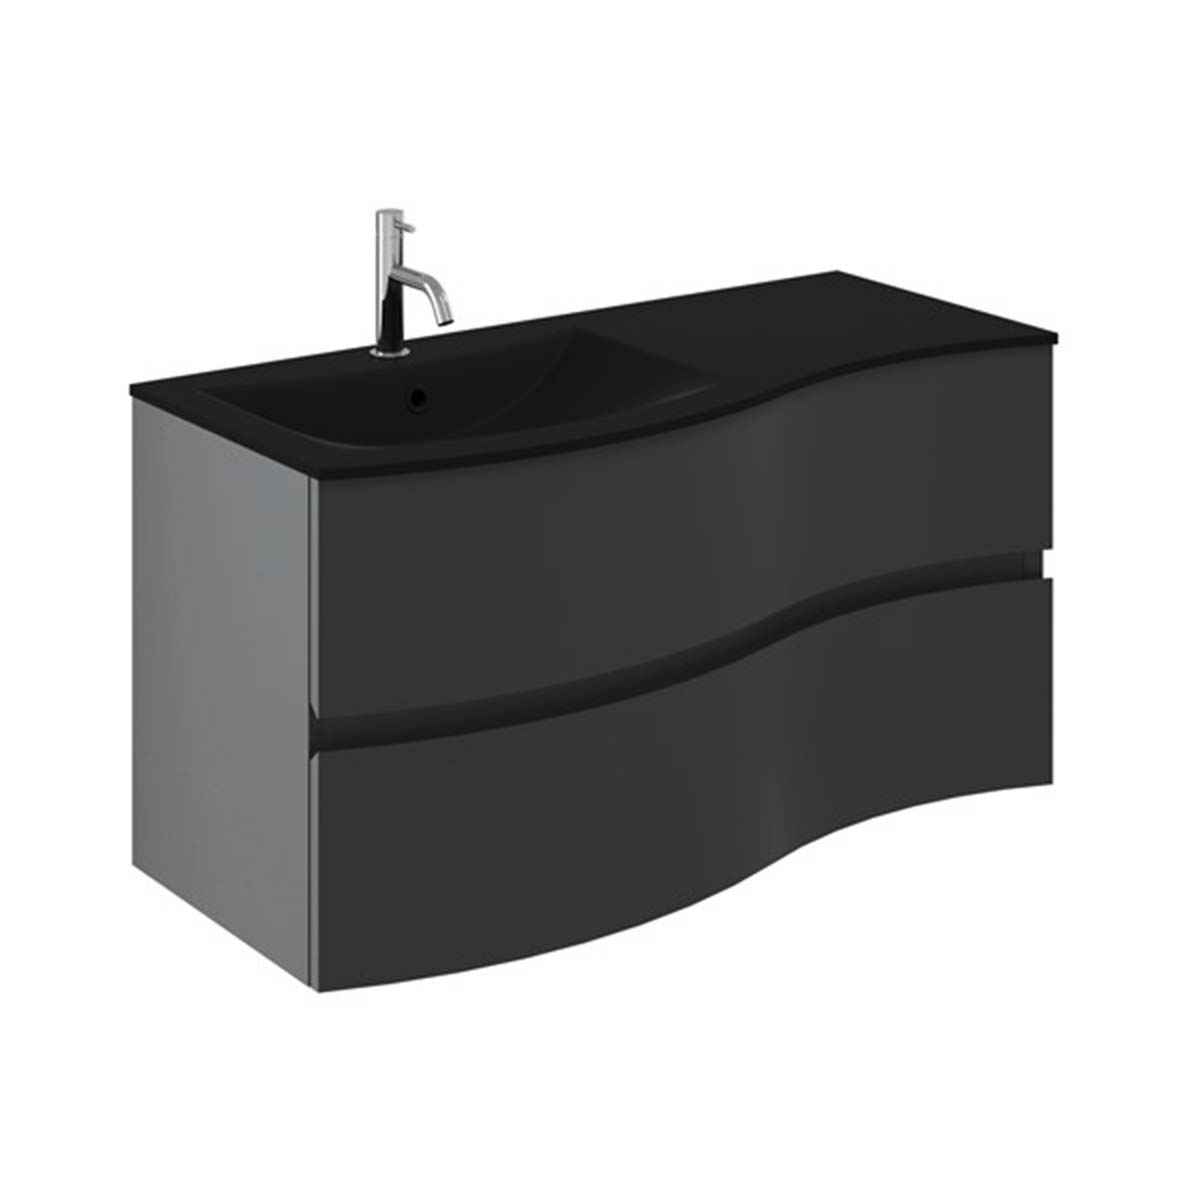 Crosswater Svelte 1000mm Double Drawer Wall Hung Vanity Unit With Midnight Black Glass Basin Onyx Black